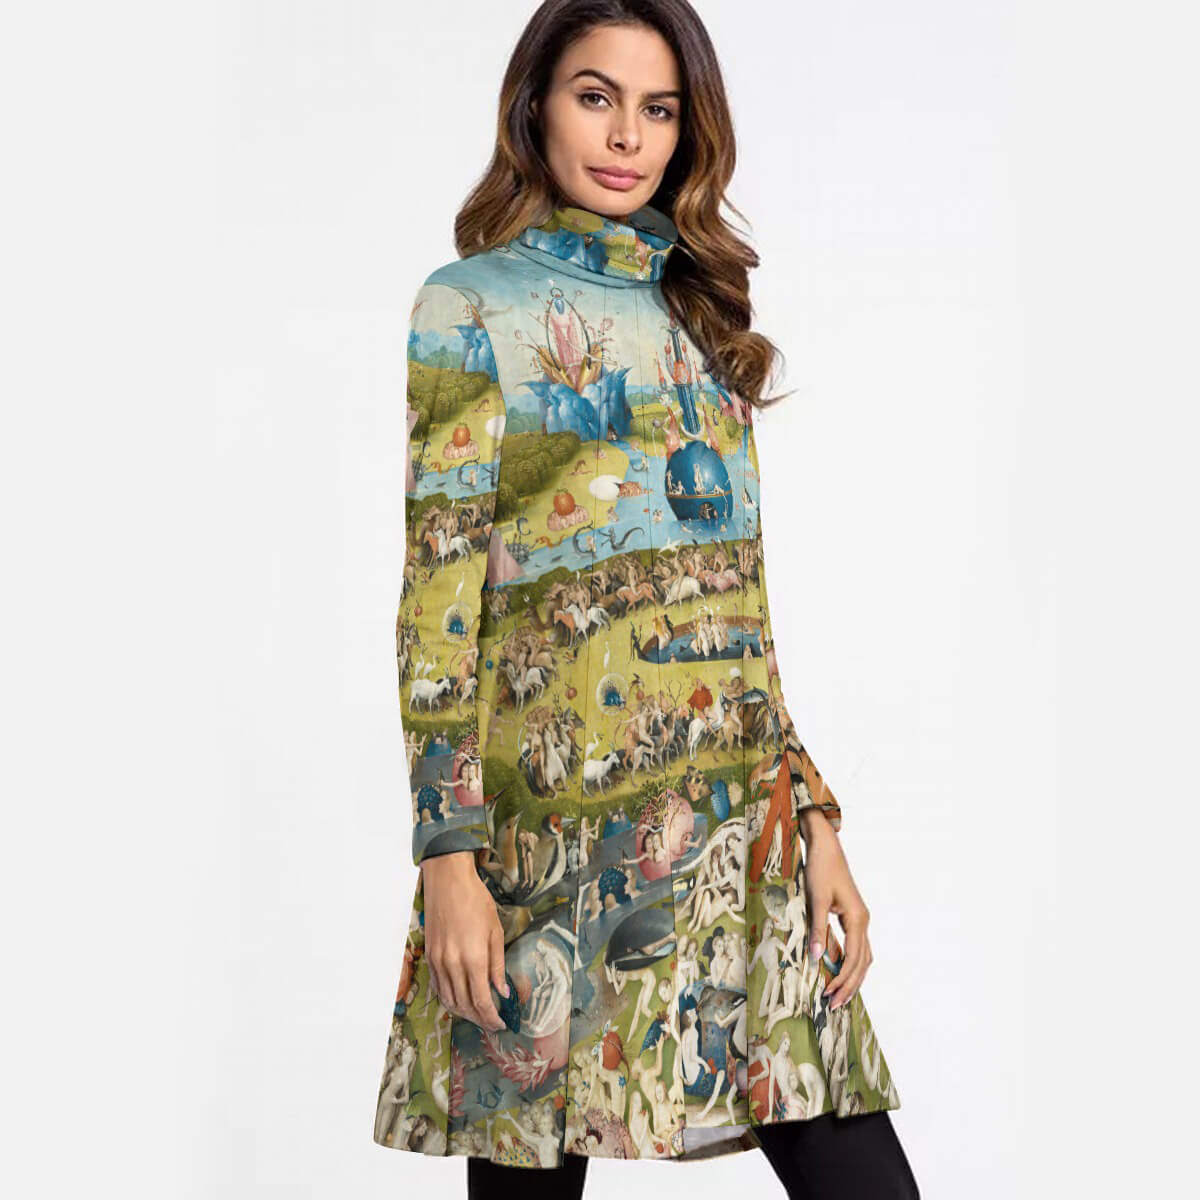 Quirky Art Lover's Dress